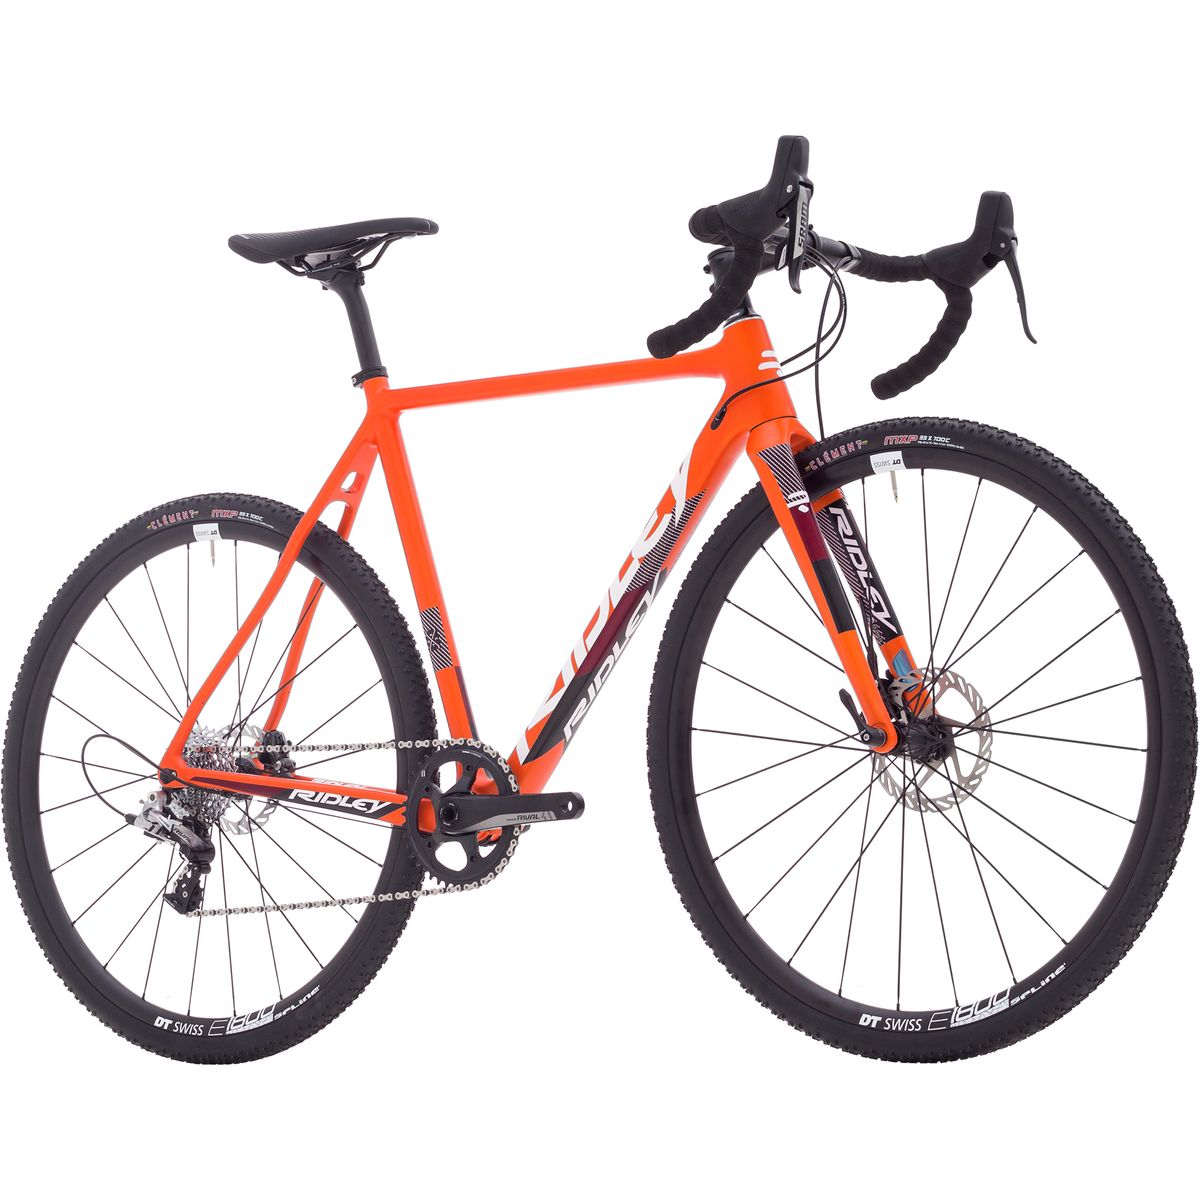 Ridley X-Night Disc Rival 1 Complete Cyclocross Bike - 2018